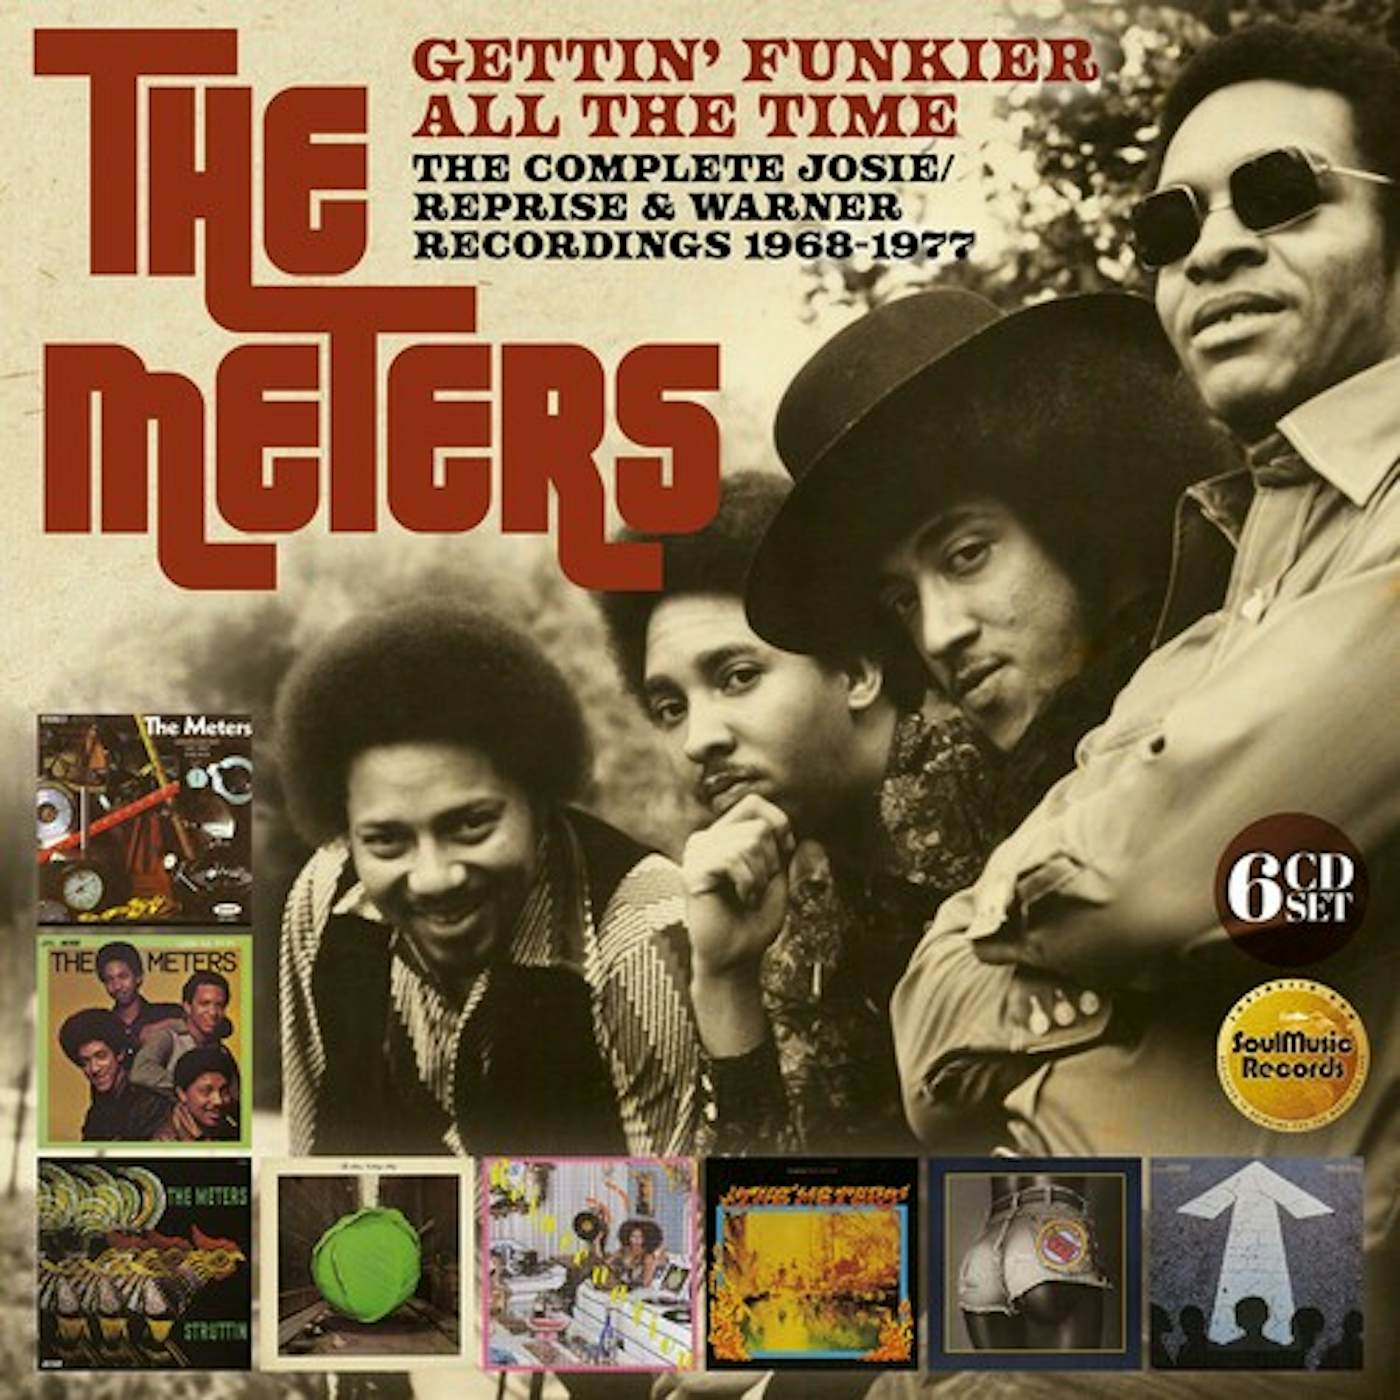 The Meters GETTIN FUNKIER ALL THE TIME: COMPLETE JOSIE CD